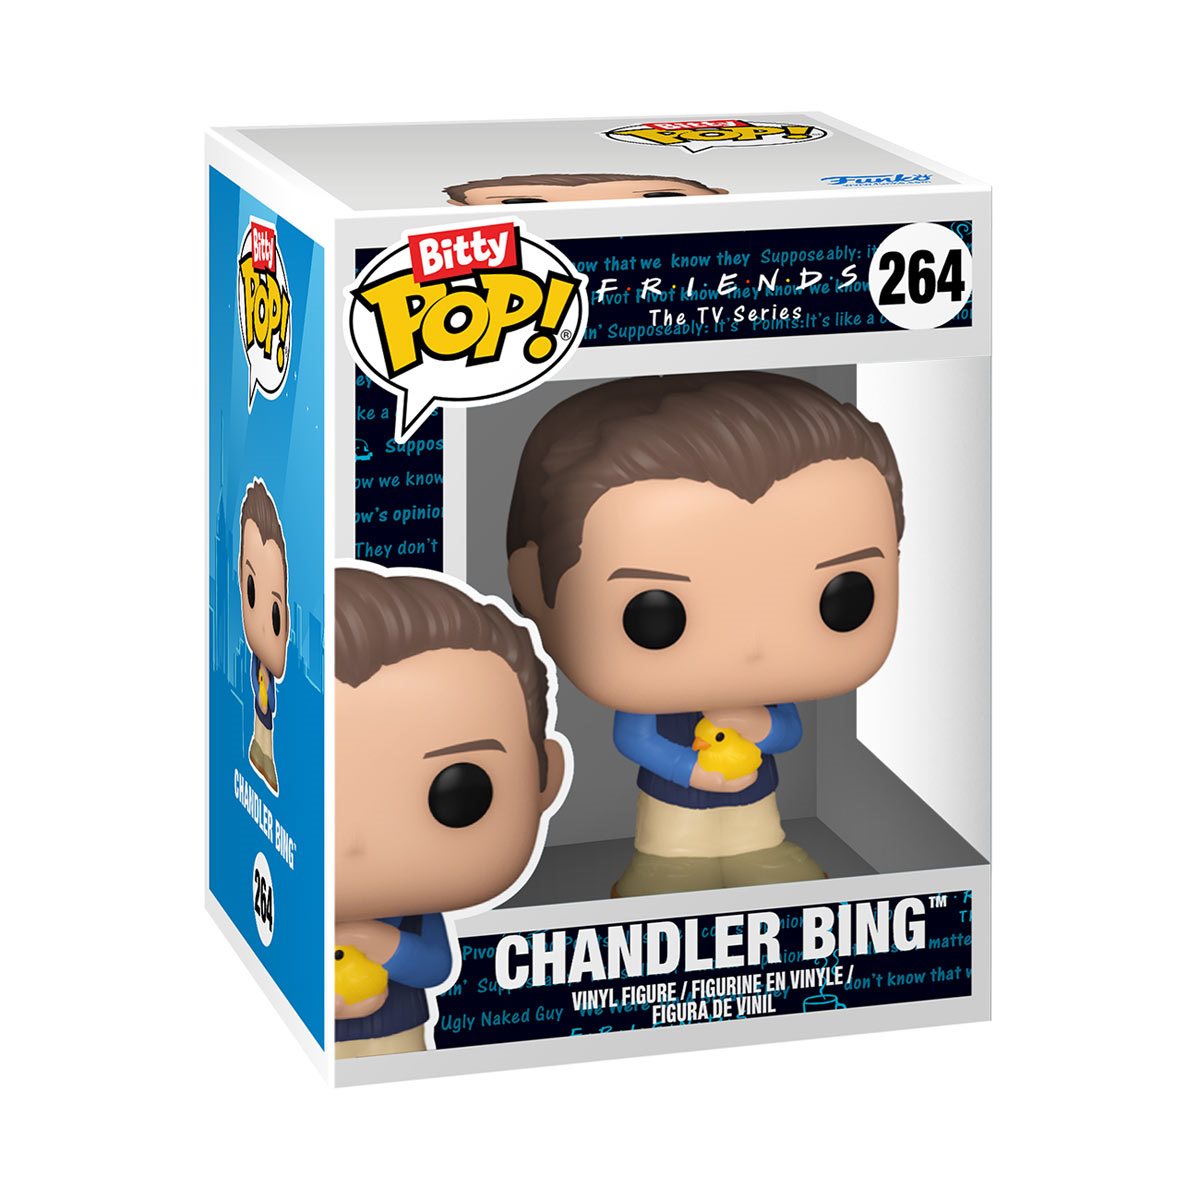 Funko Bitty Pop! Friends Mini Collectible Toys 4-Pack - Phoebe Buffay,  Monica Geller, Chandler Bing & Mystery Chase Figure (Styles May Vary)